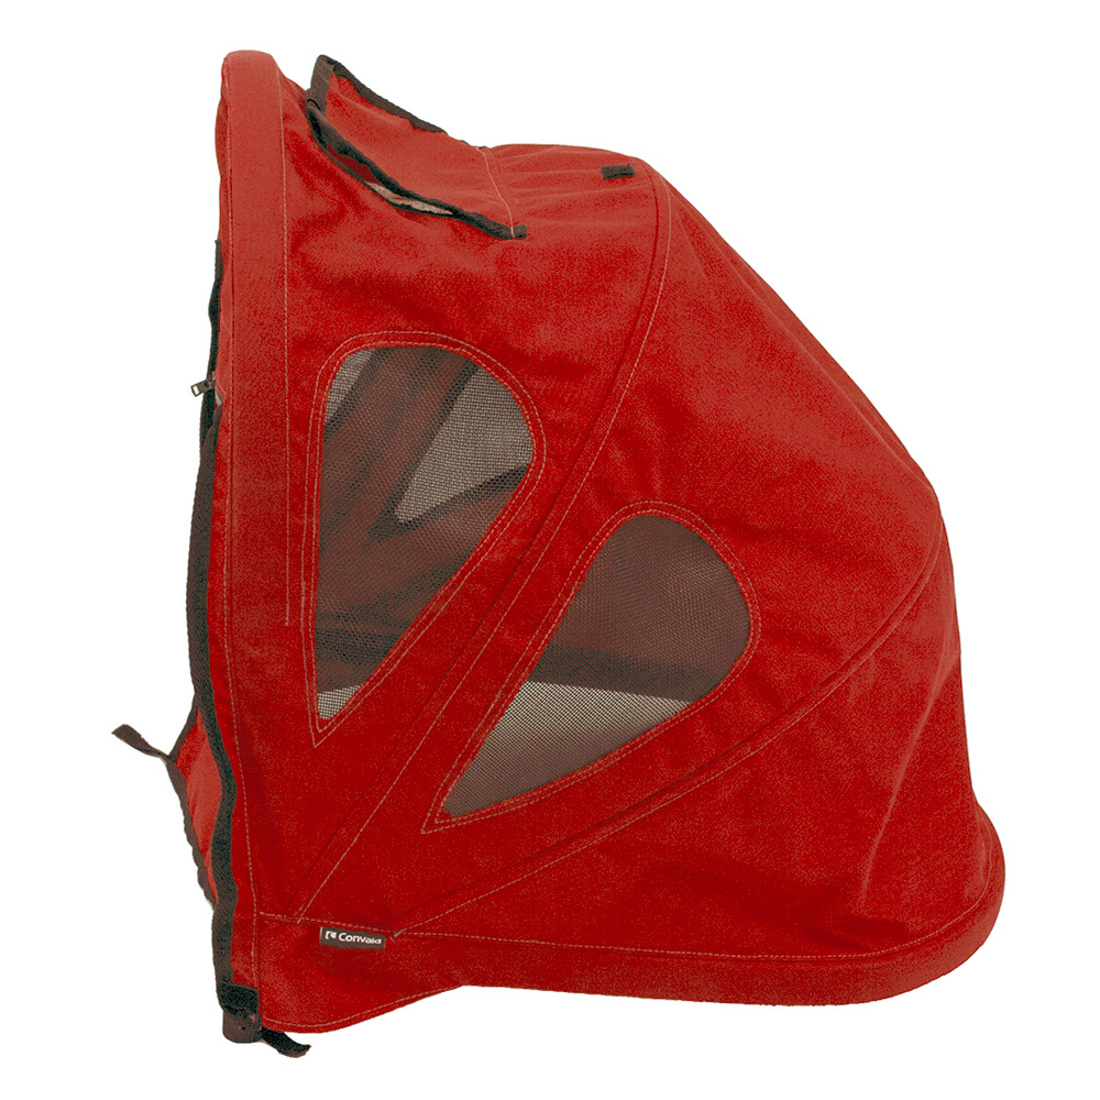 Extended Headrest Cover - with Windows (Canopy) - Red